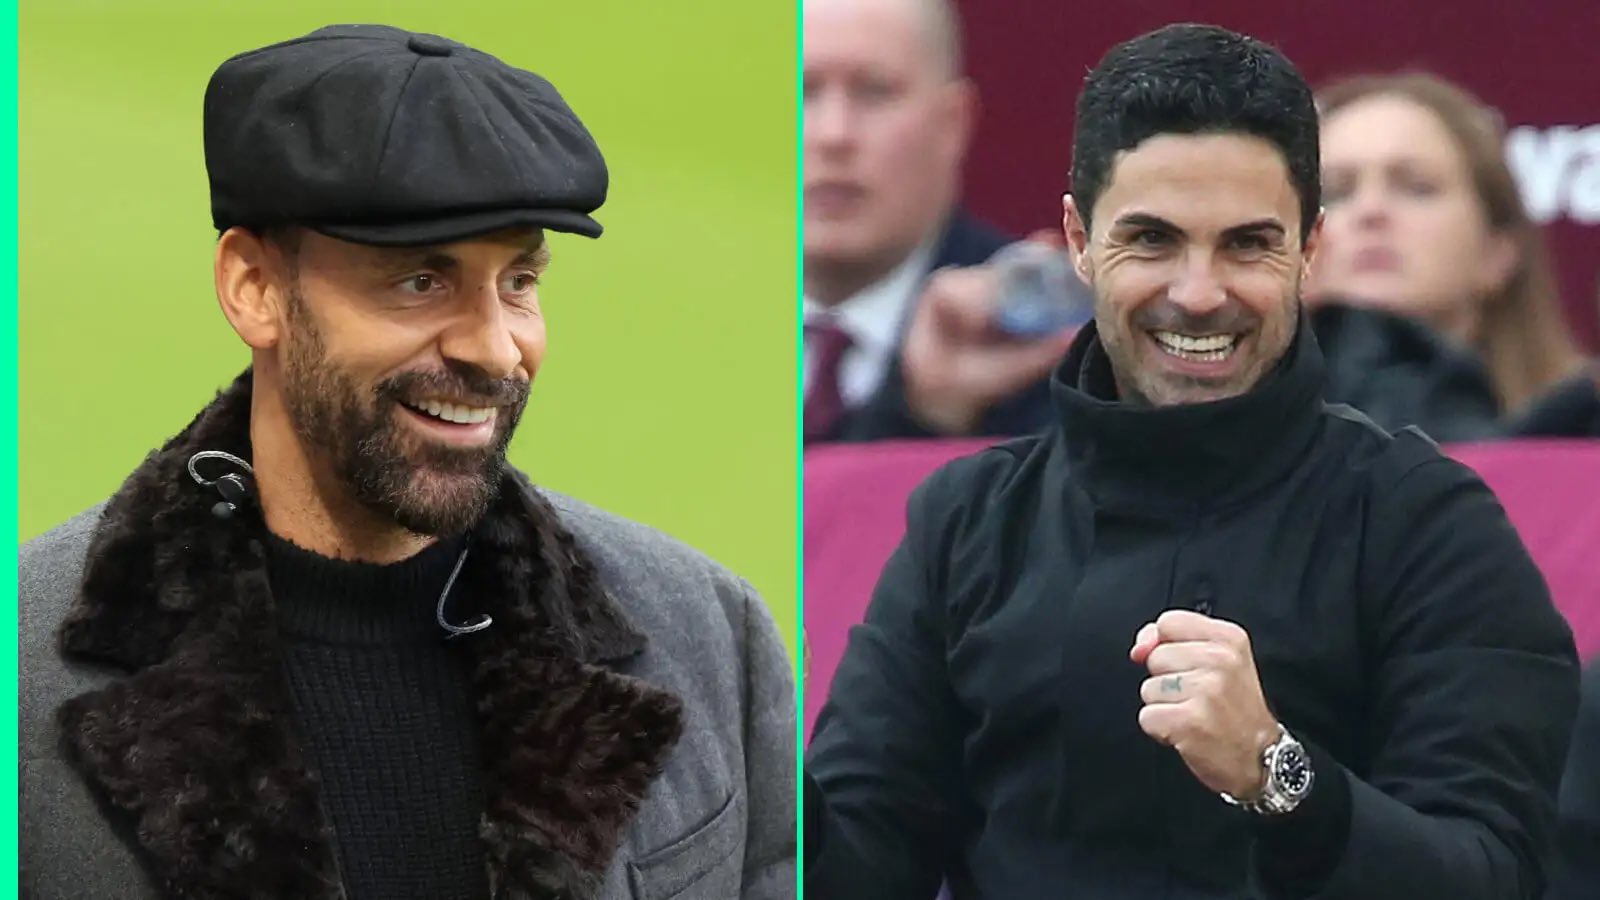 Ferdinand’s Arteta claim sparks strong reactions from Arsenal supporters.